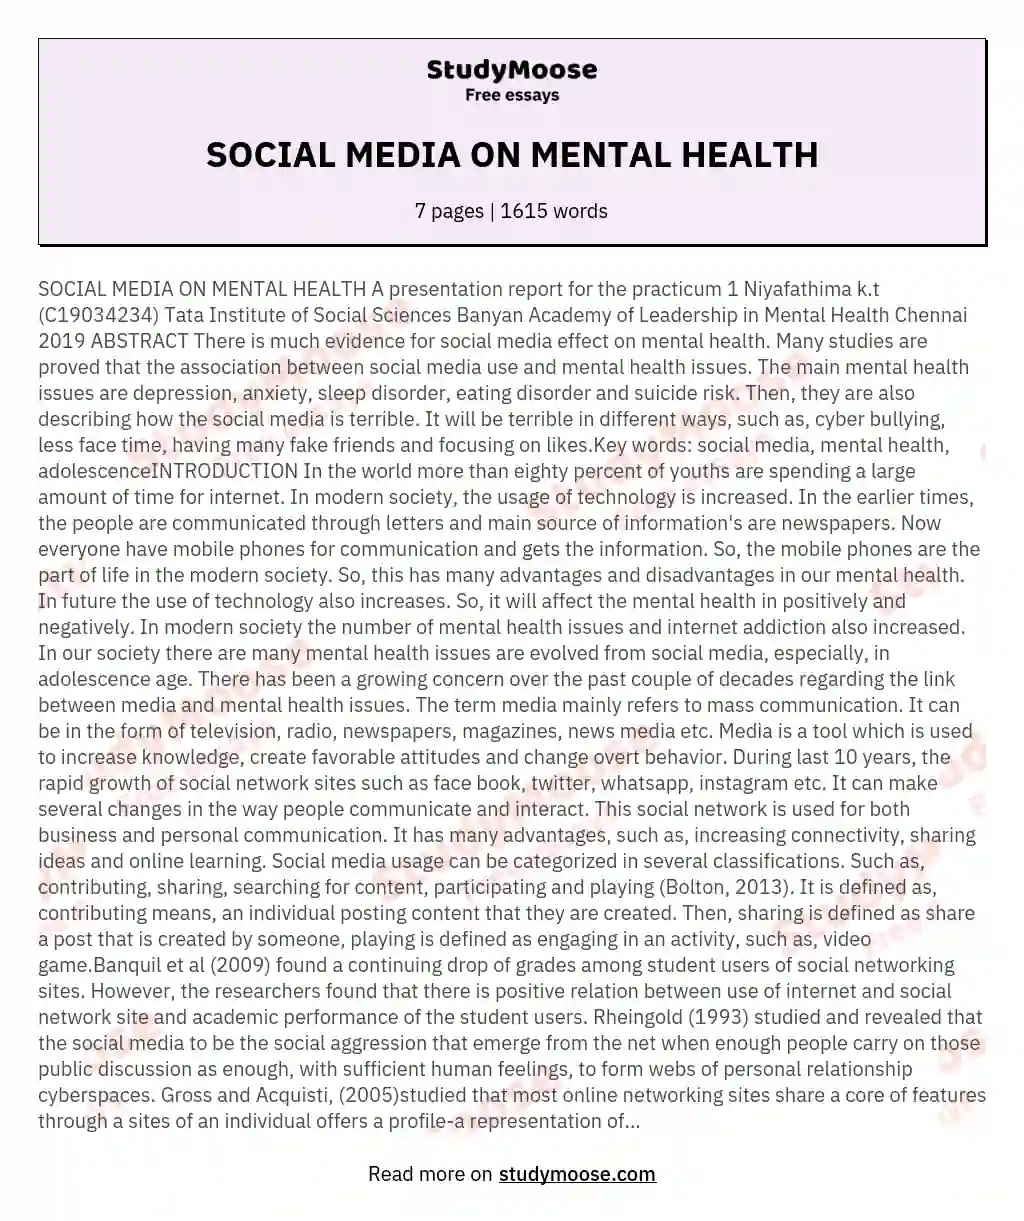 social media and mental health research essay